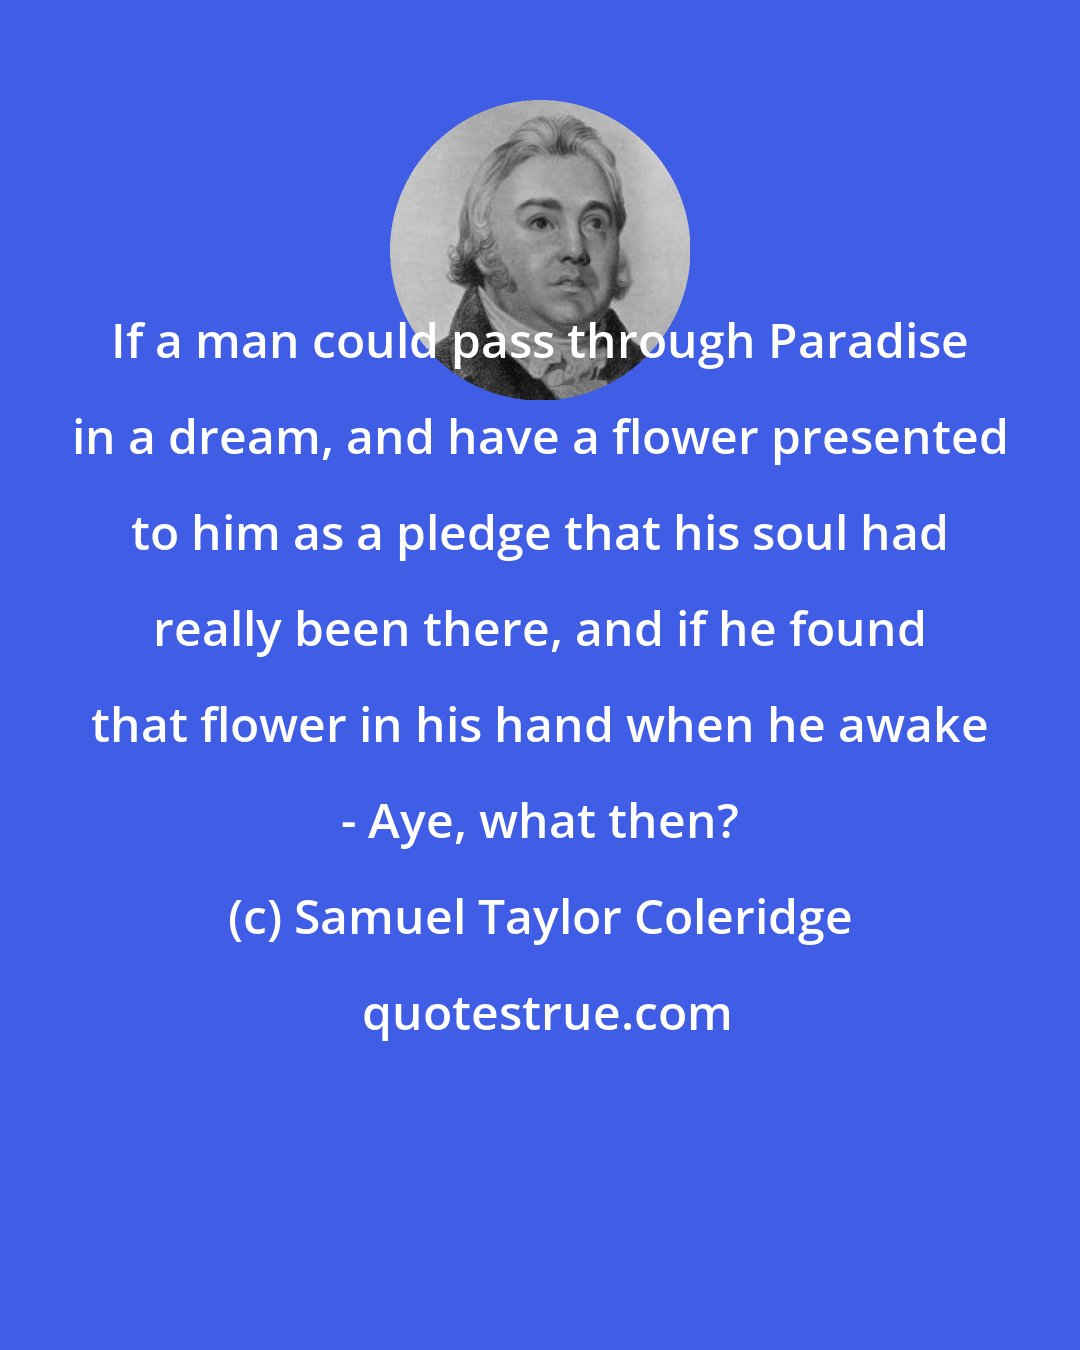 Samuel Taylor Coleridge: If a man could pass through Paradise in a dream, and have a flower presented to him as a pledge that his soul had really been there, and if he found that flower in his hand when he awake - Aye, what then?